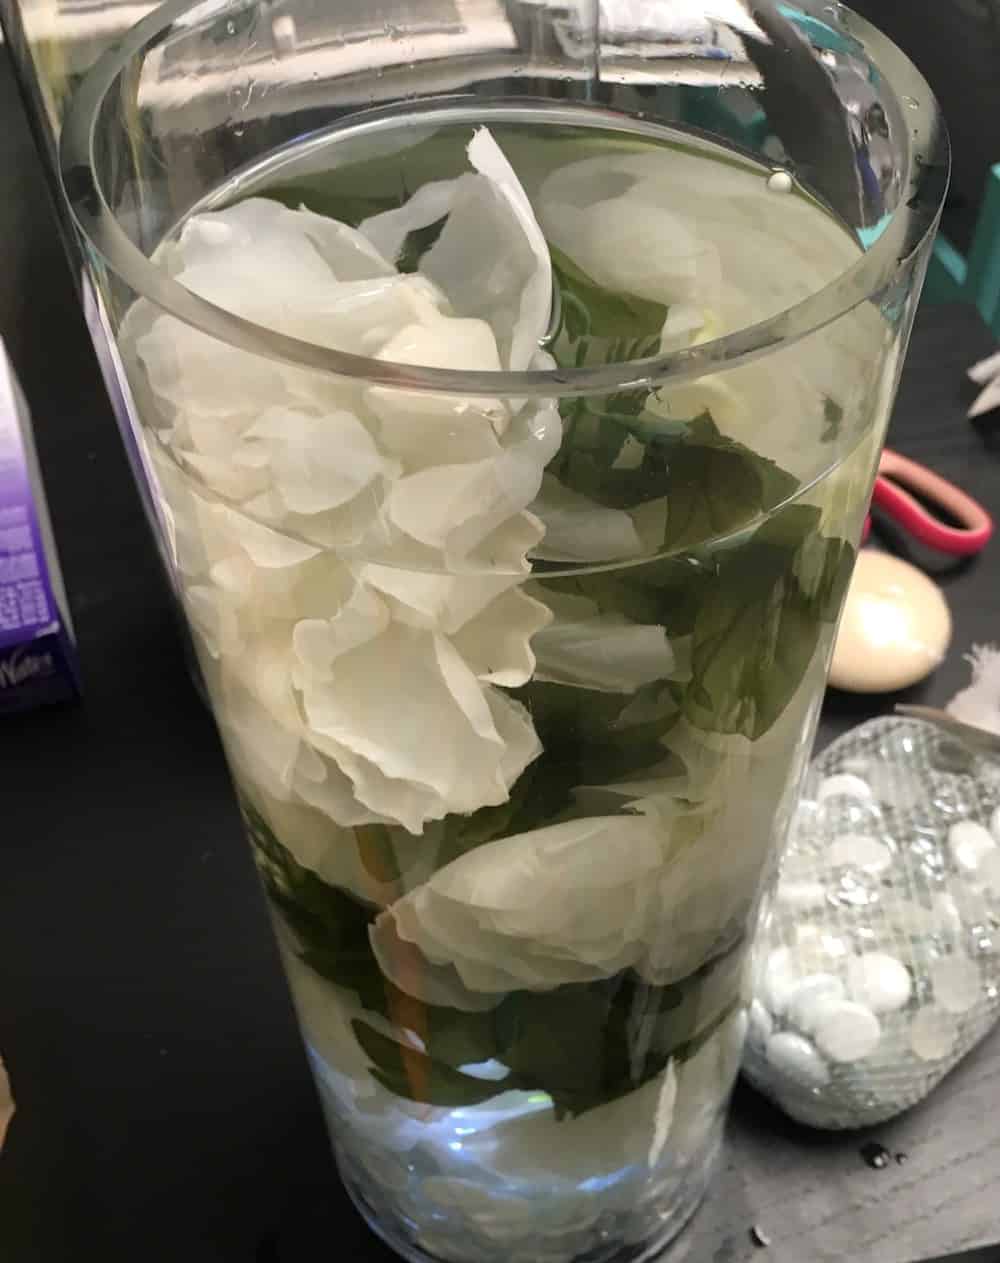 Water added to a wedding centerpiece